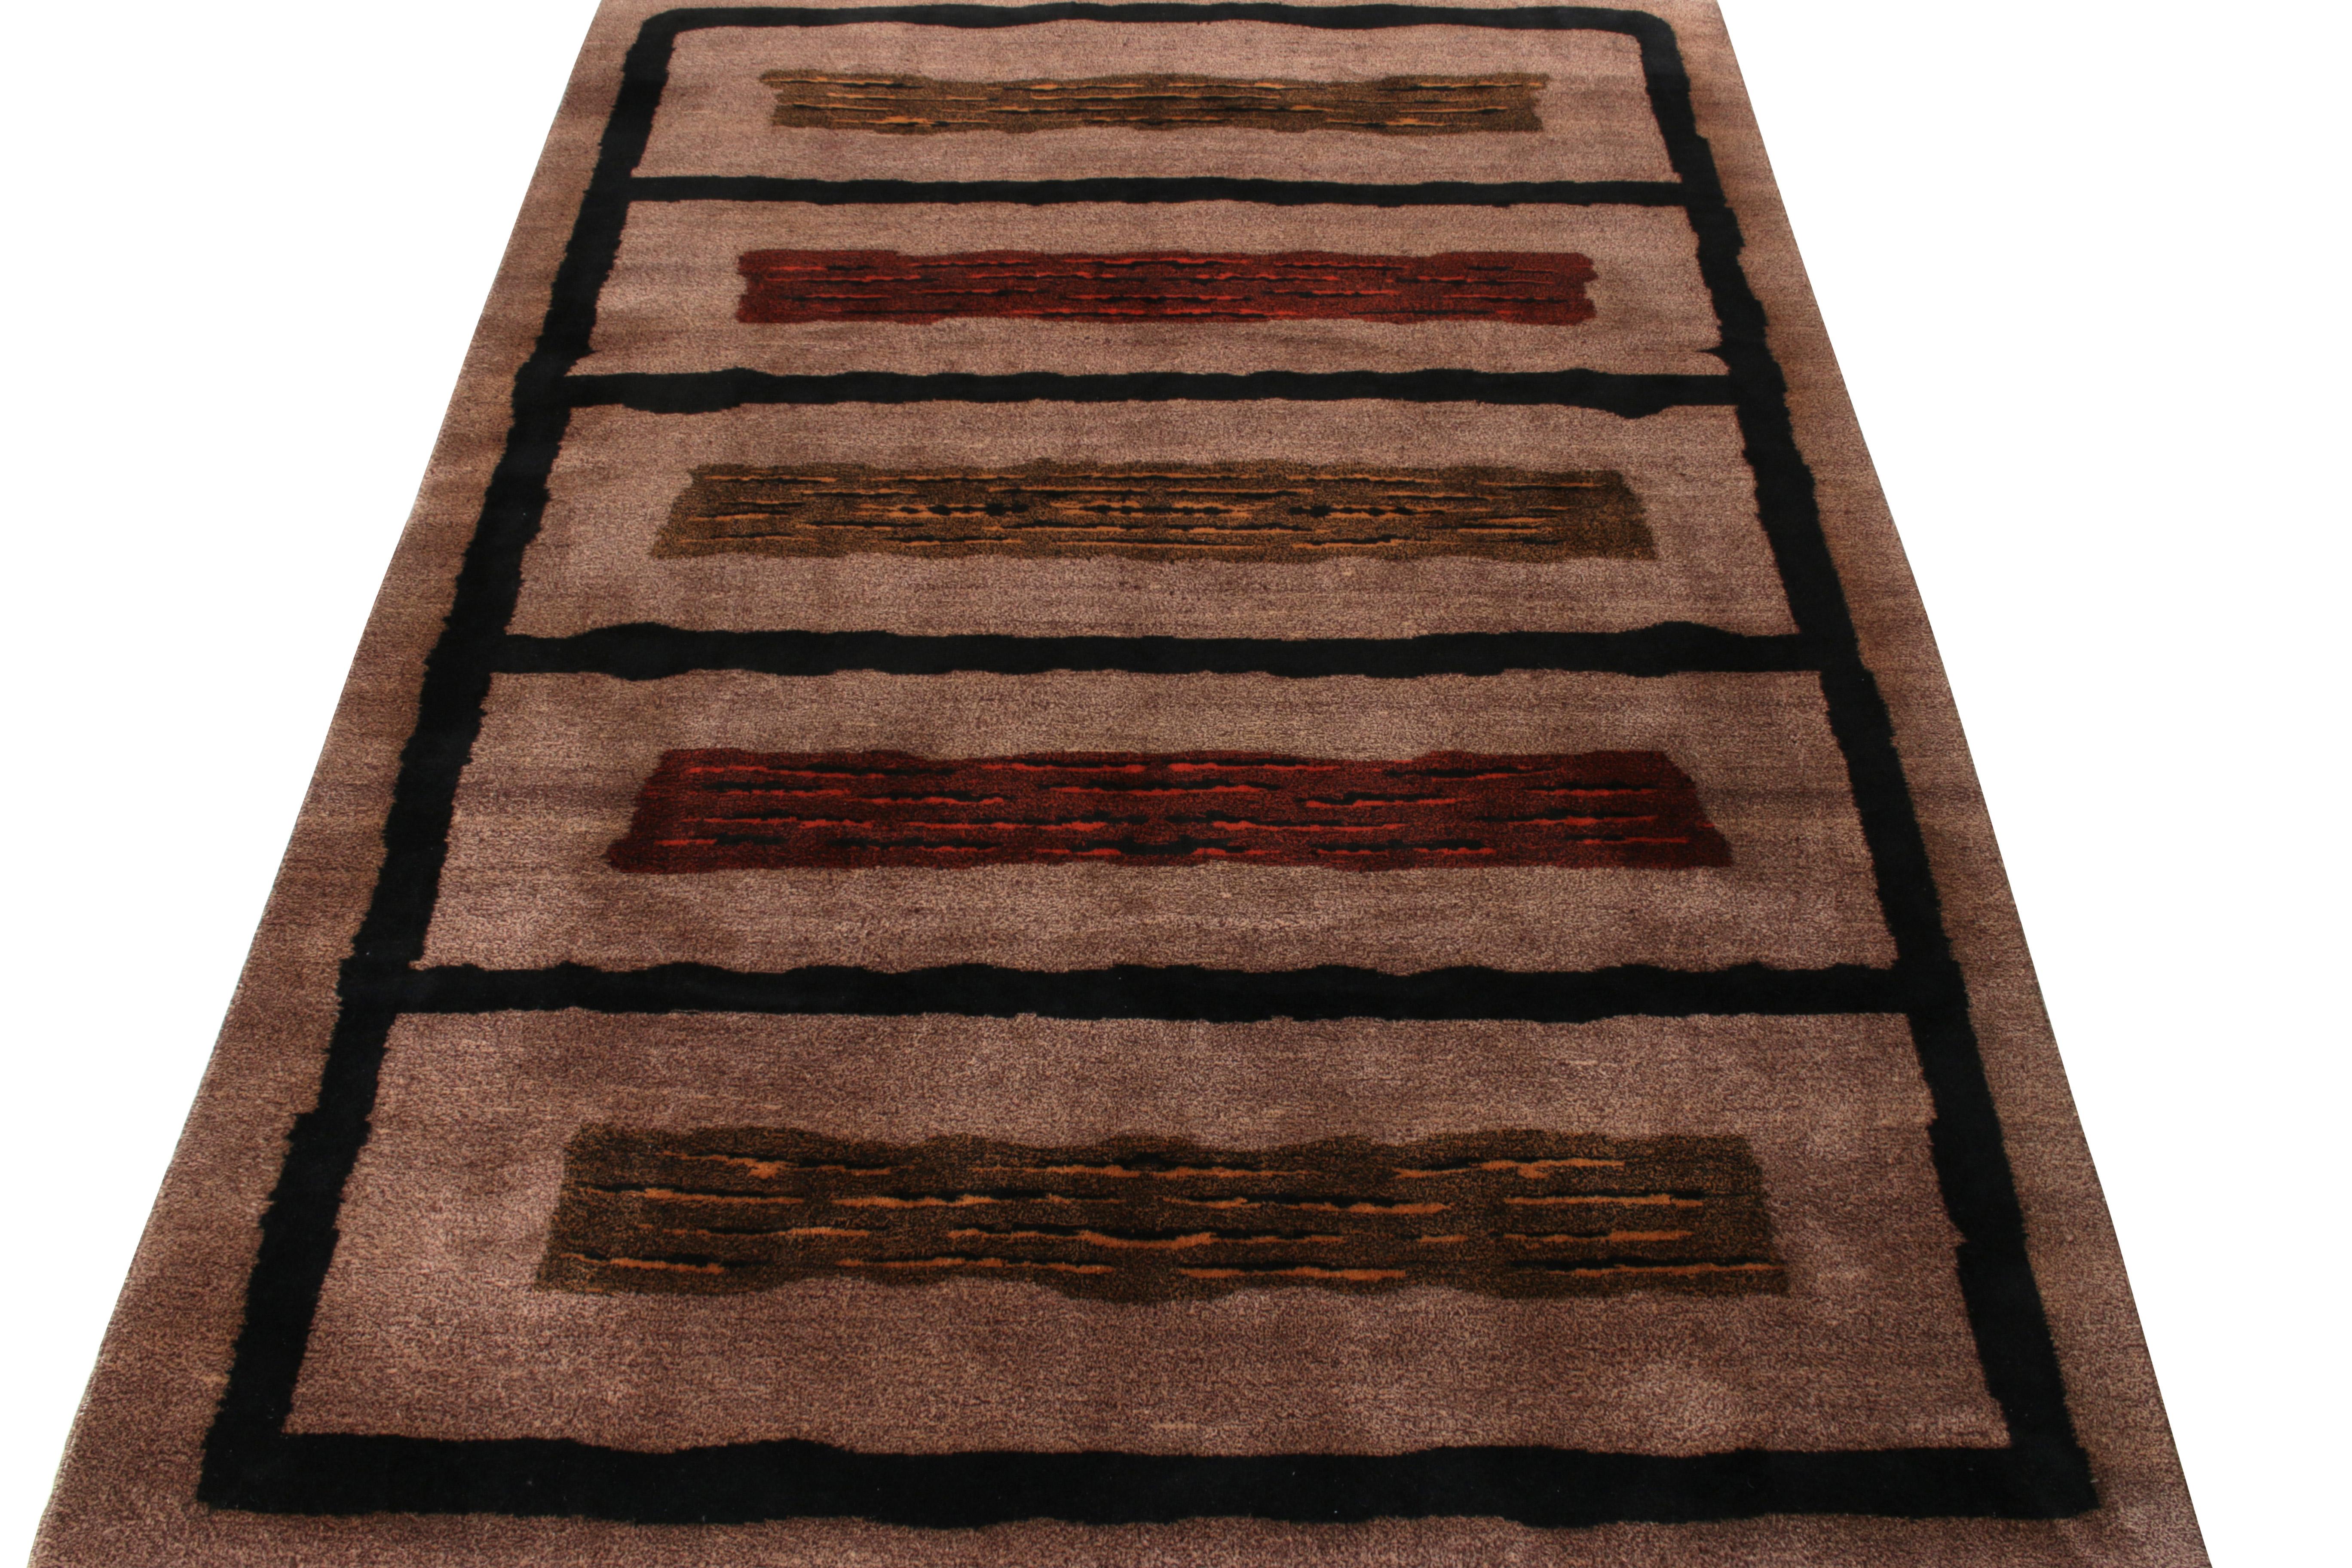 Originating from Turkey circa 1960-1970, a 7x10 panelled vintage mid-century rug featuring a neat geometric pattern in coal black, maroon and mustard on a luxurious brown backdrop. From Rug & Kilim’s Mid-Century Pasha Collection, commemorating the